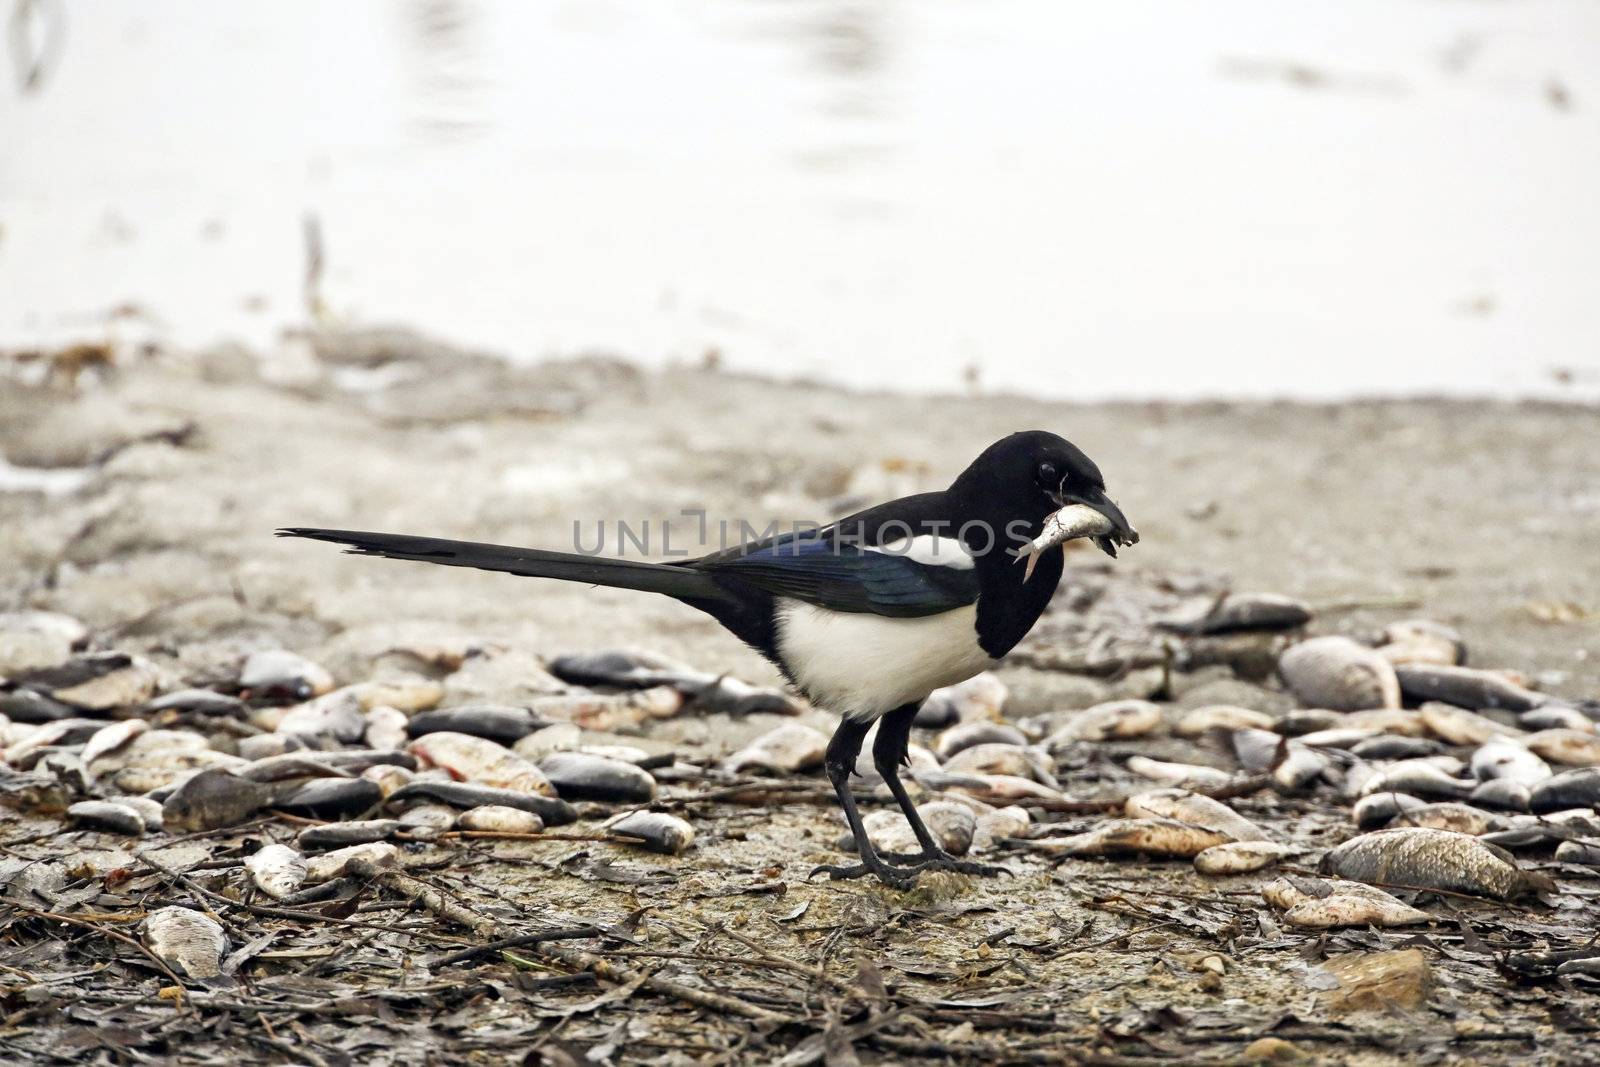 A magpie with a fish in its beak